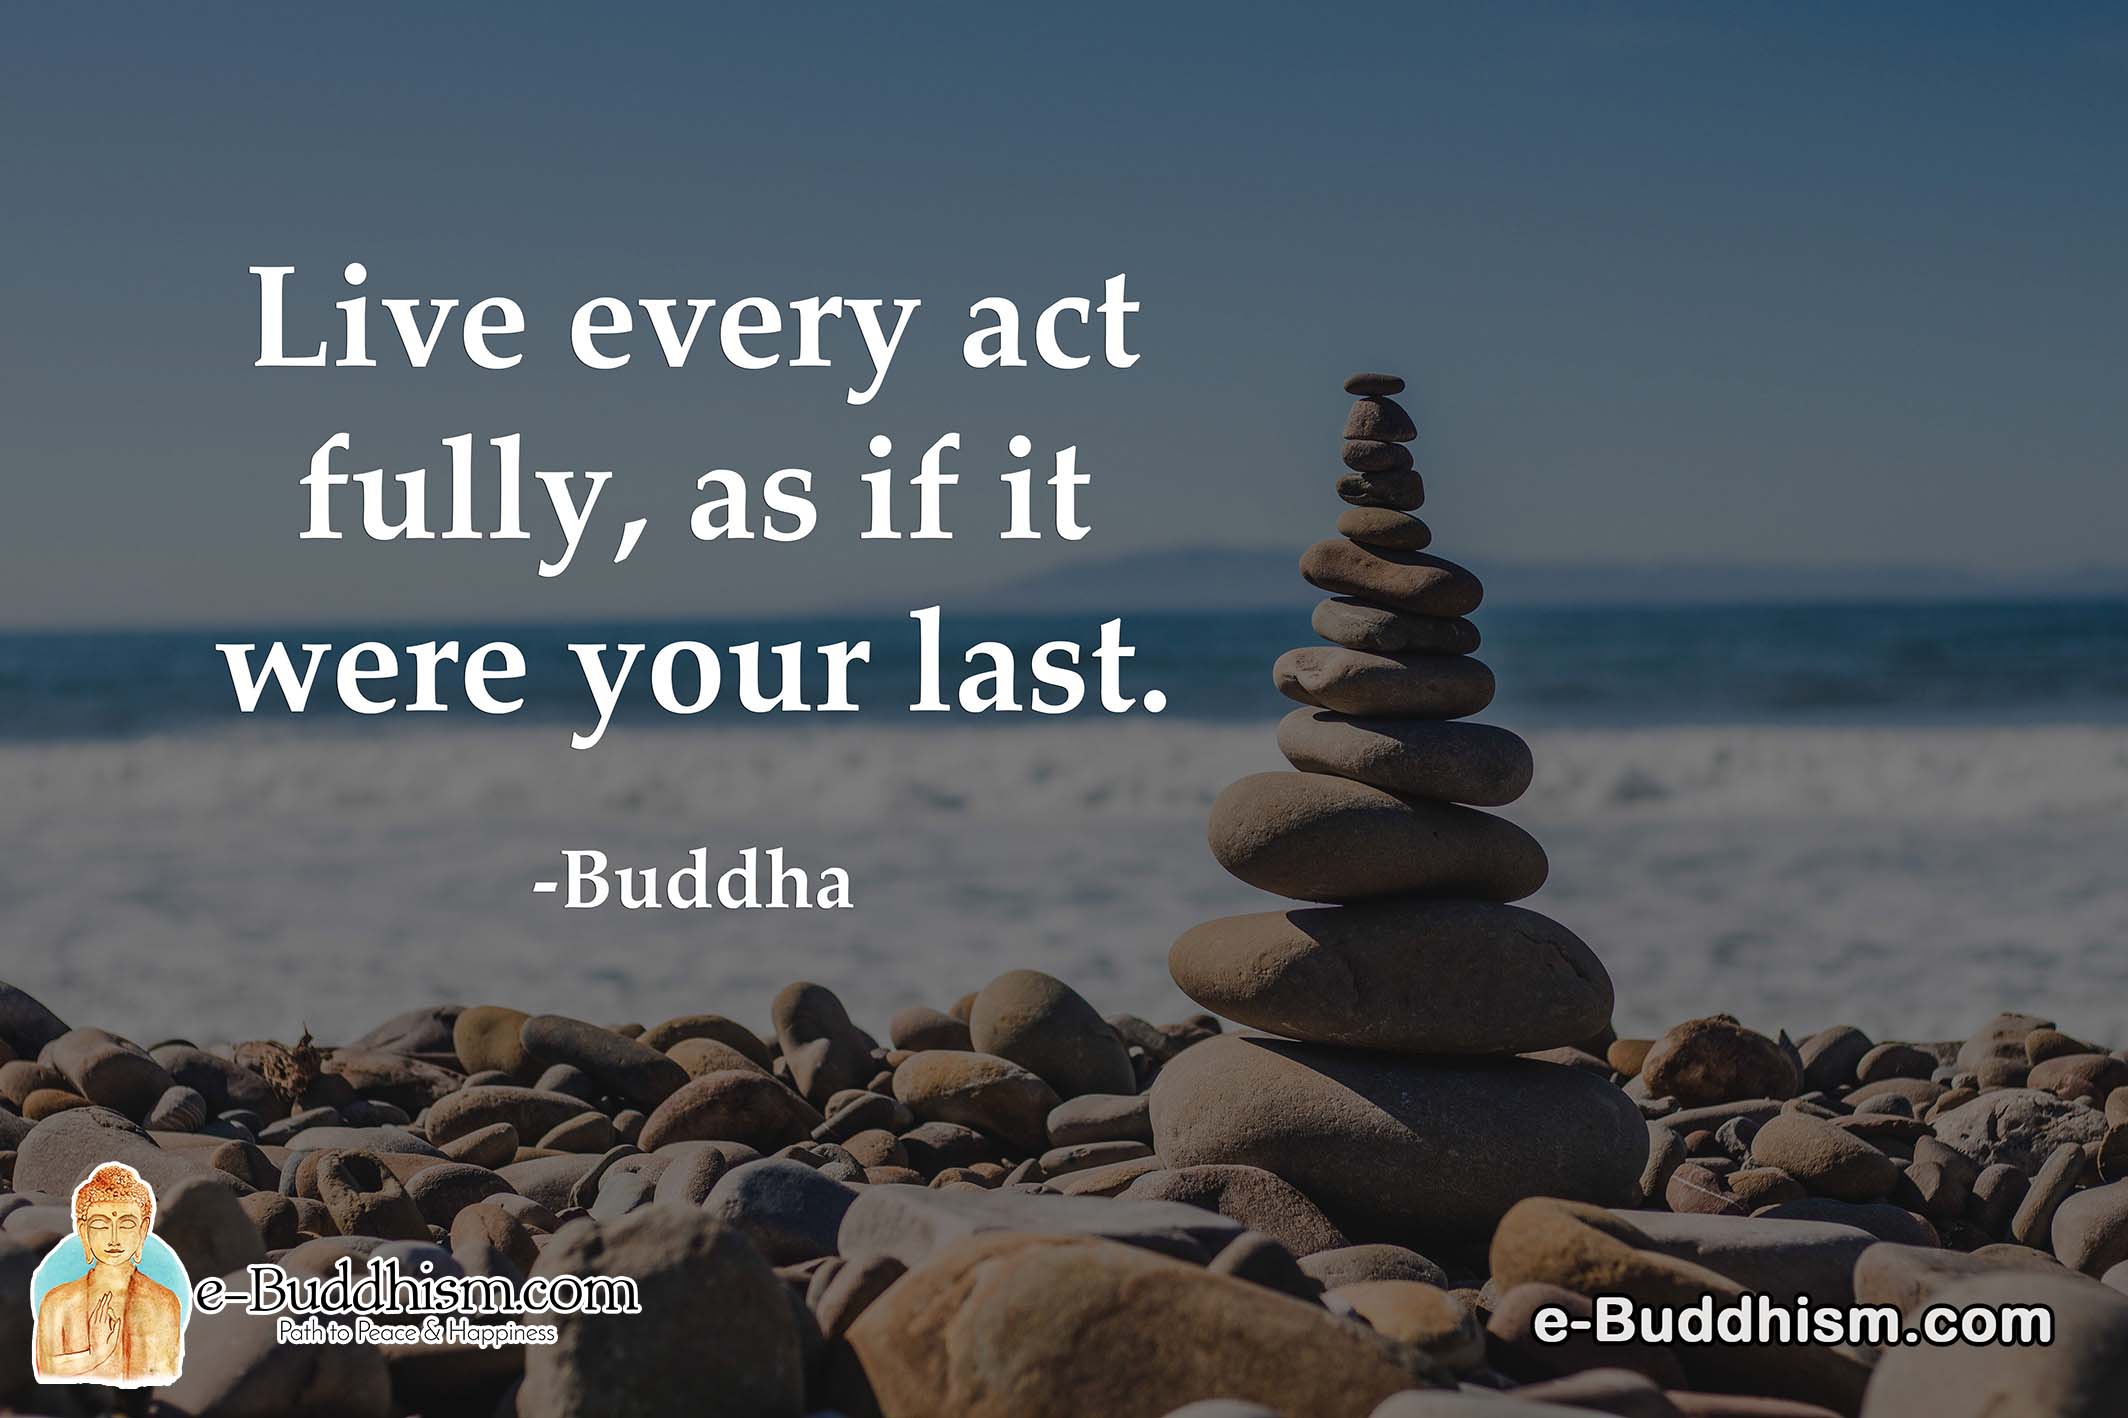 Live every act fully, as if it were your last. -Buddha